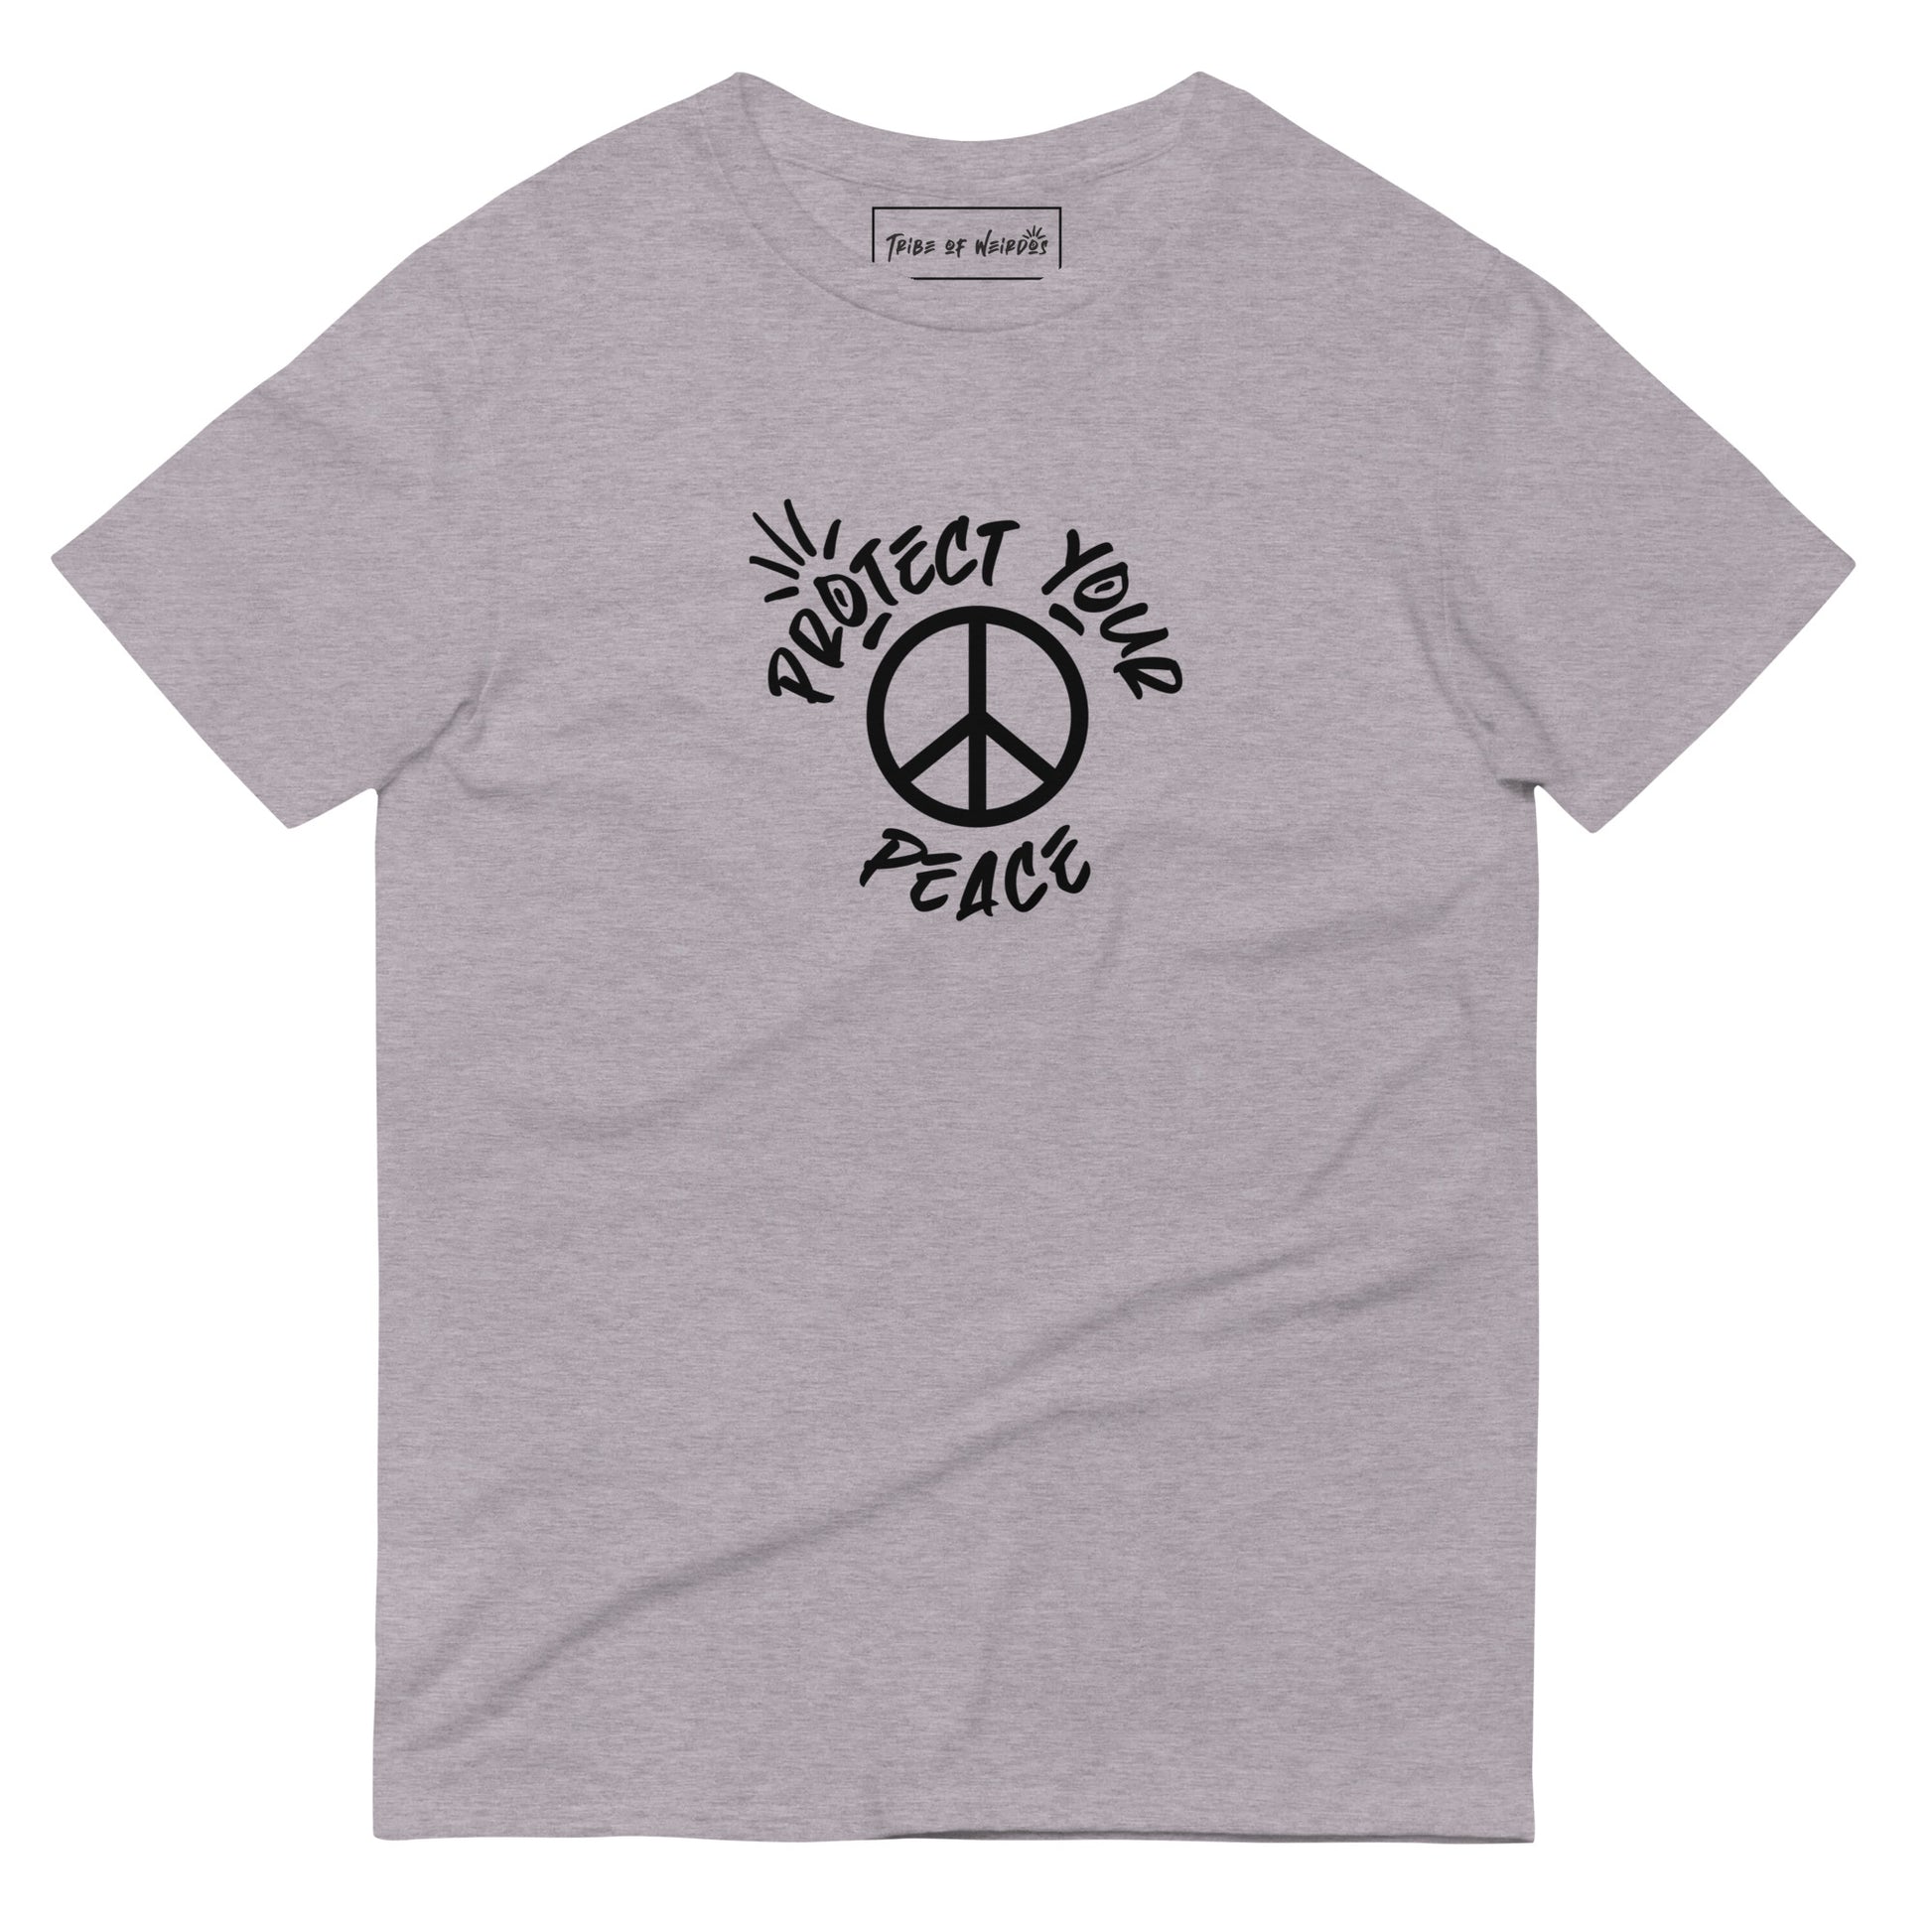 Image showcasing 'Tribe of Weirdos' unisex T-shirt, emblazoned with the 'Protect Your Peace' slogan, promoting individuality and serenity in a comfortable, stylish fit.